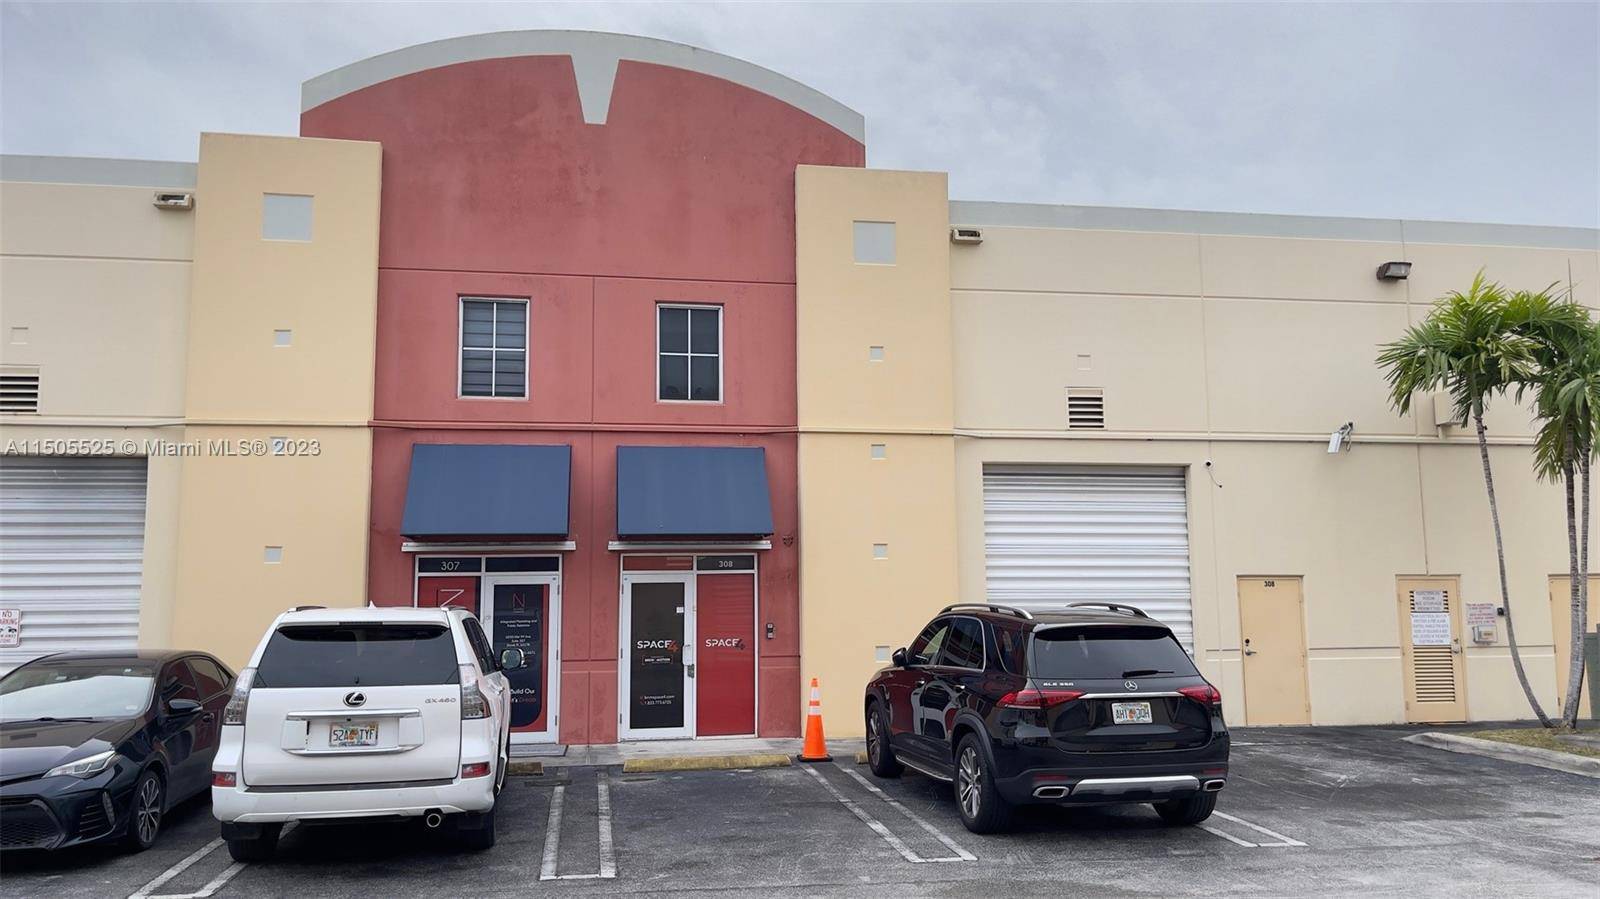 Prime location in Doral For Rent 1, 765 SF Office Warehouse In Doral.